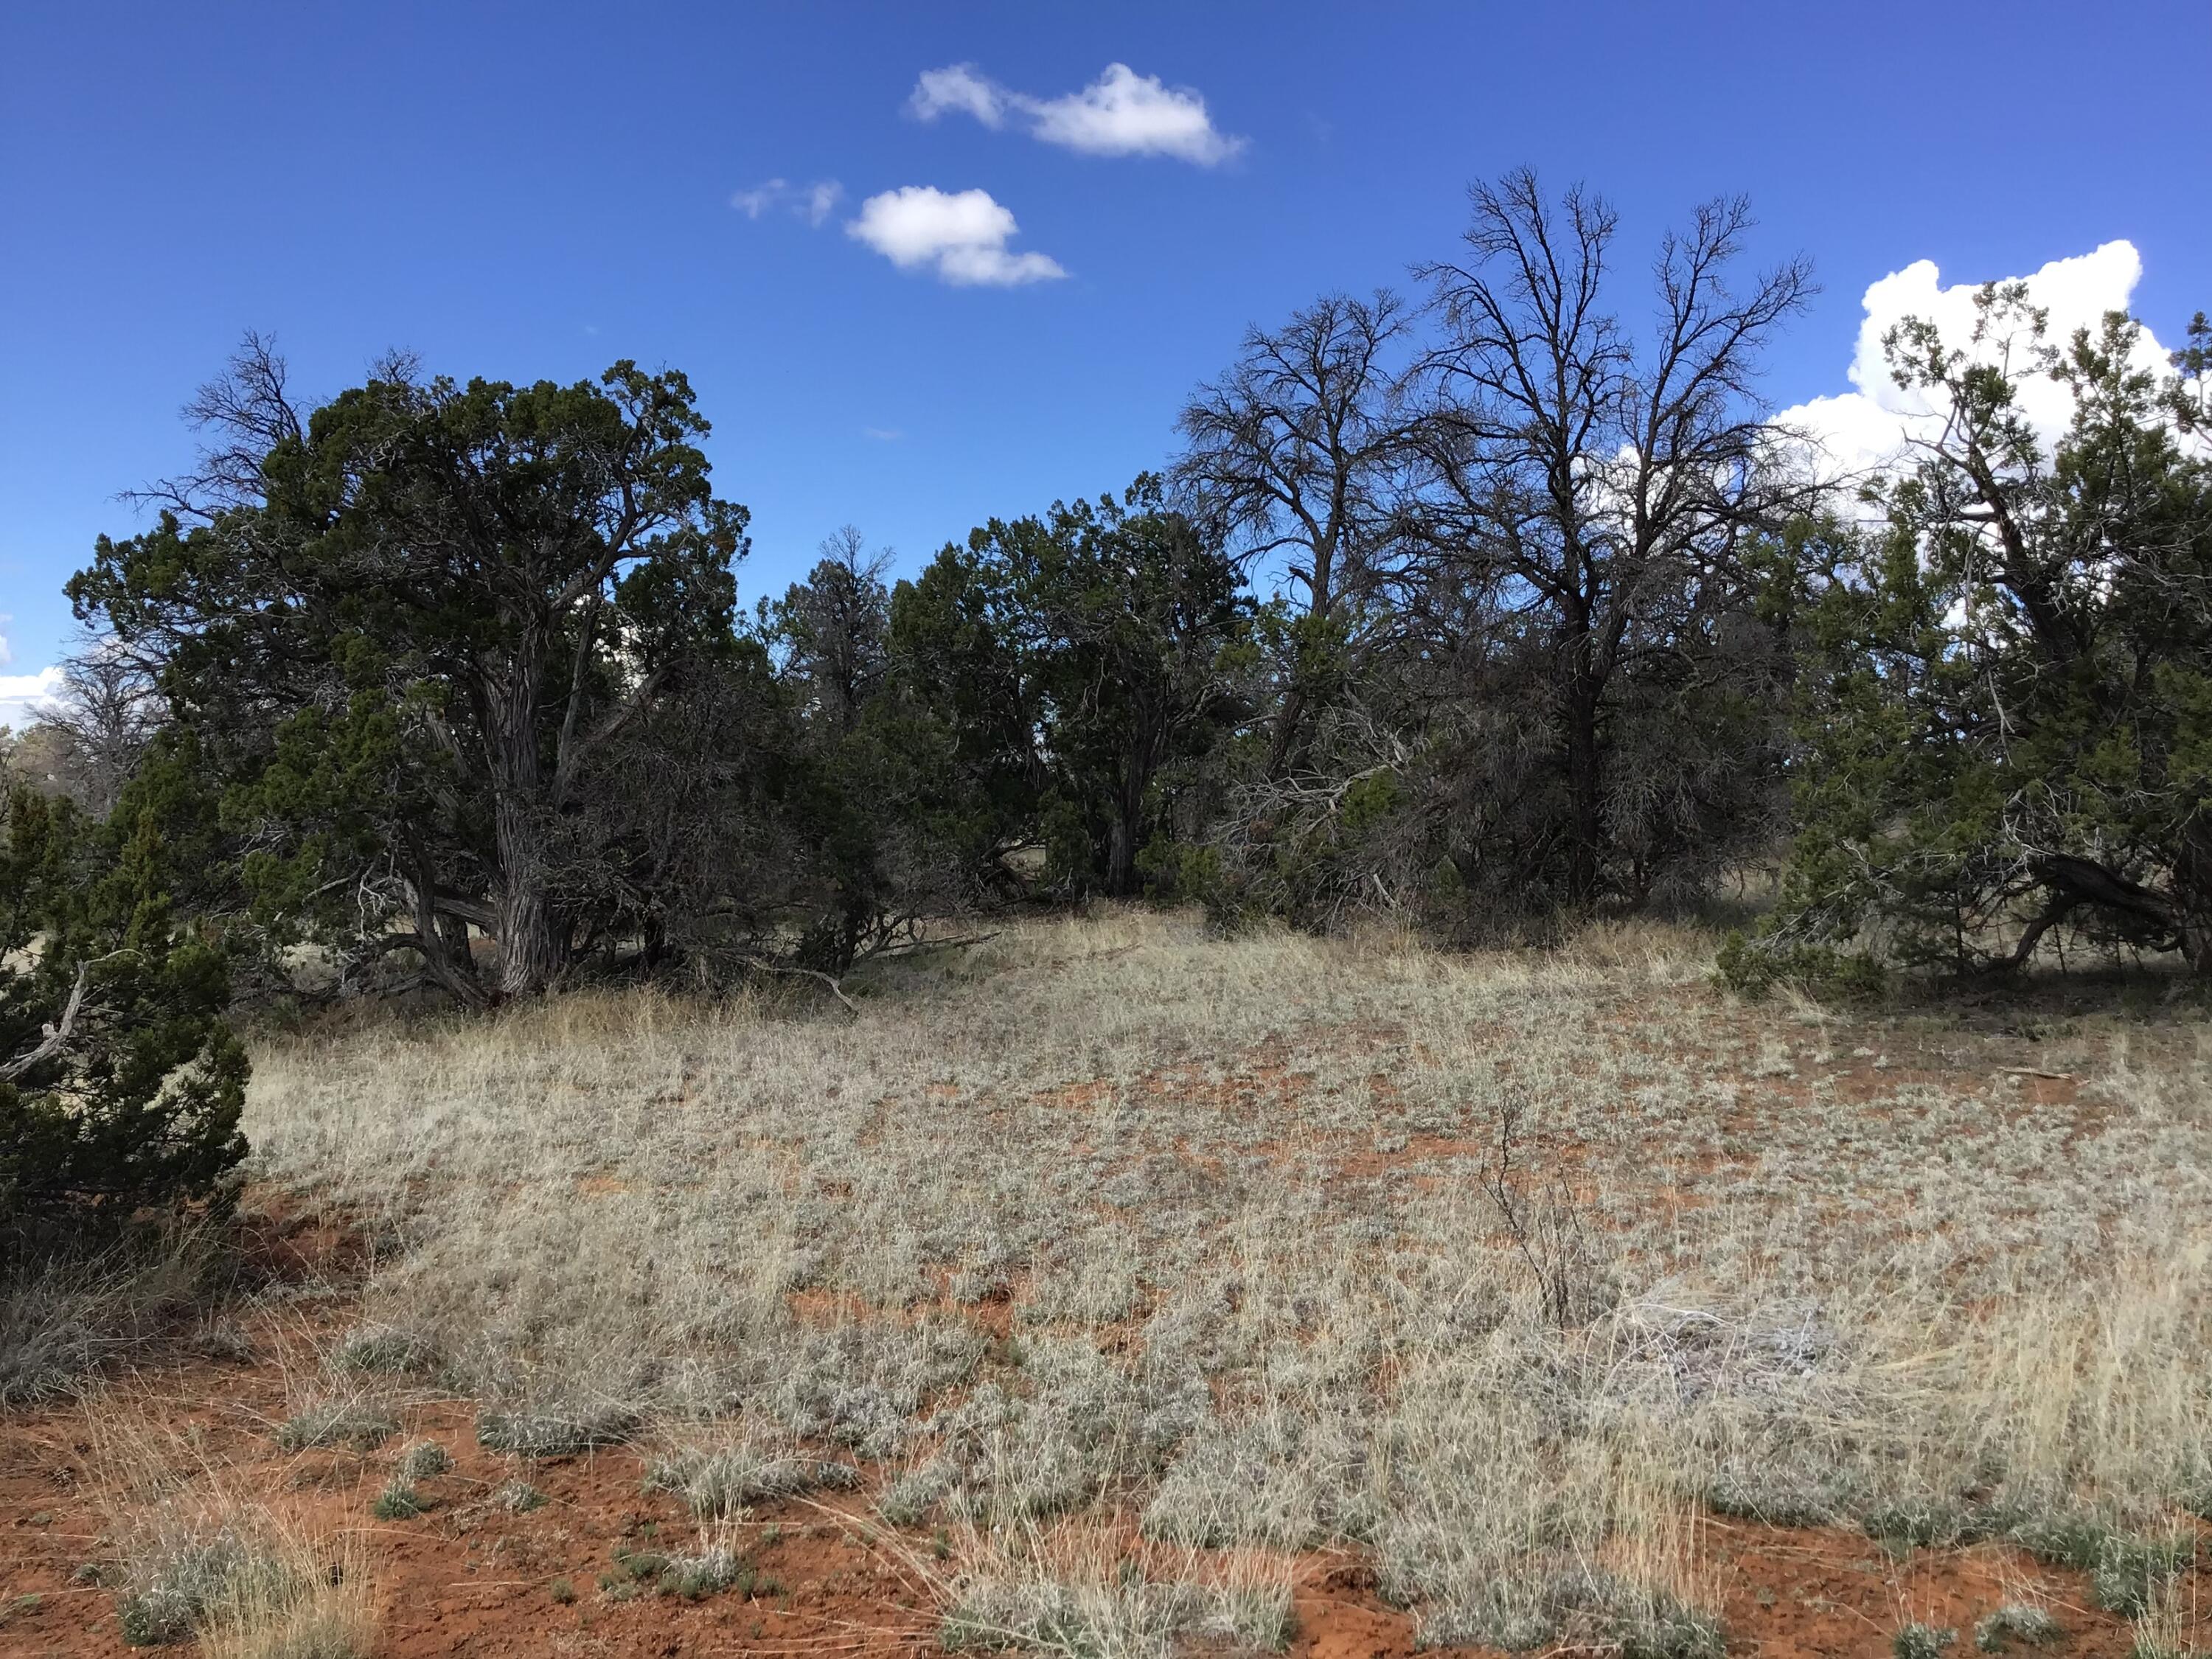 Lot 655 Gabe Road, Ramah, New Mexico 87321, ,Land,For Sale,Lot 655 Gabe Road,1034551